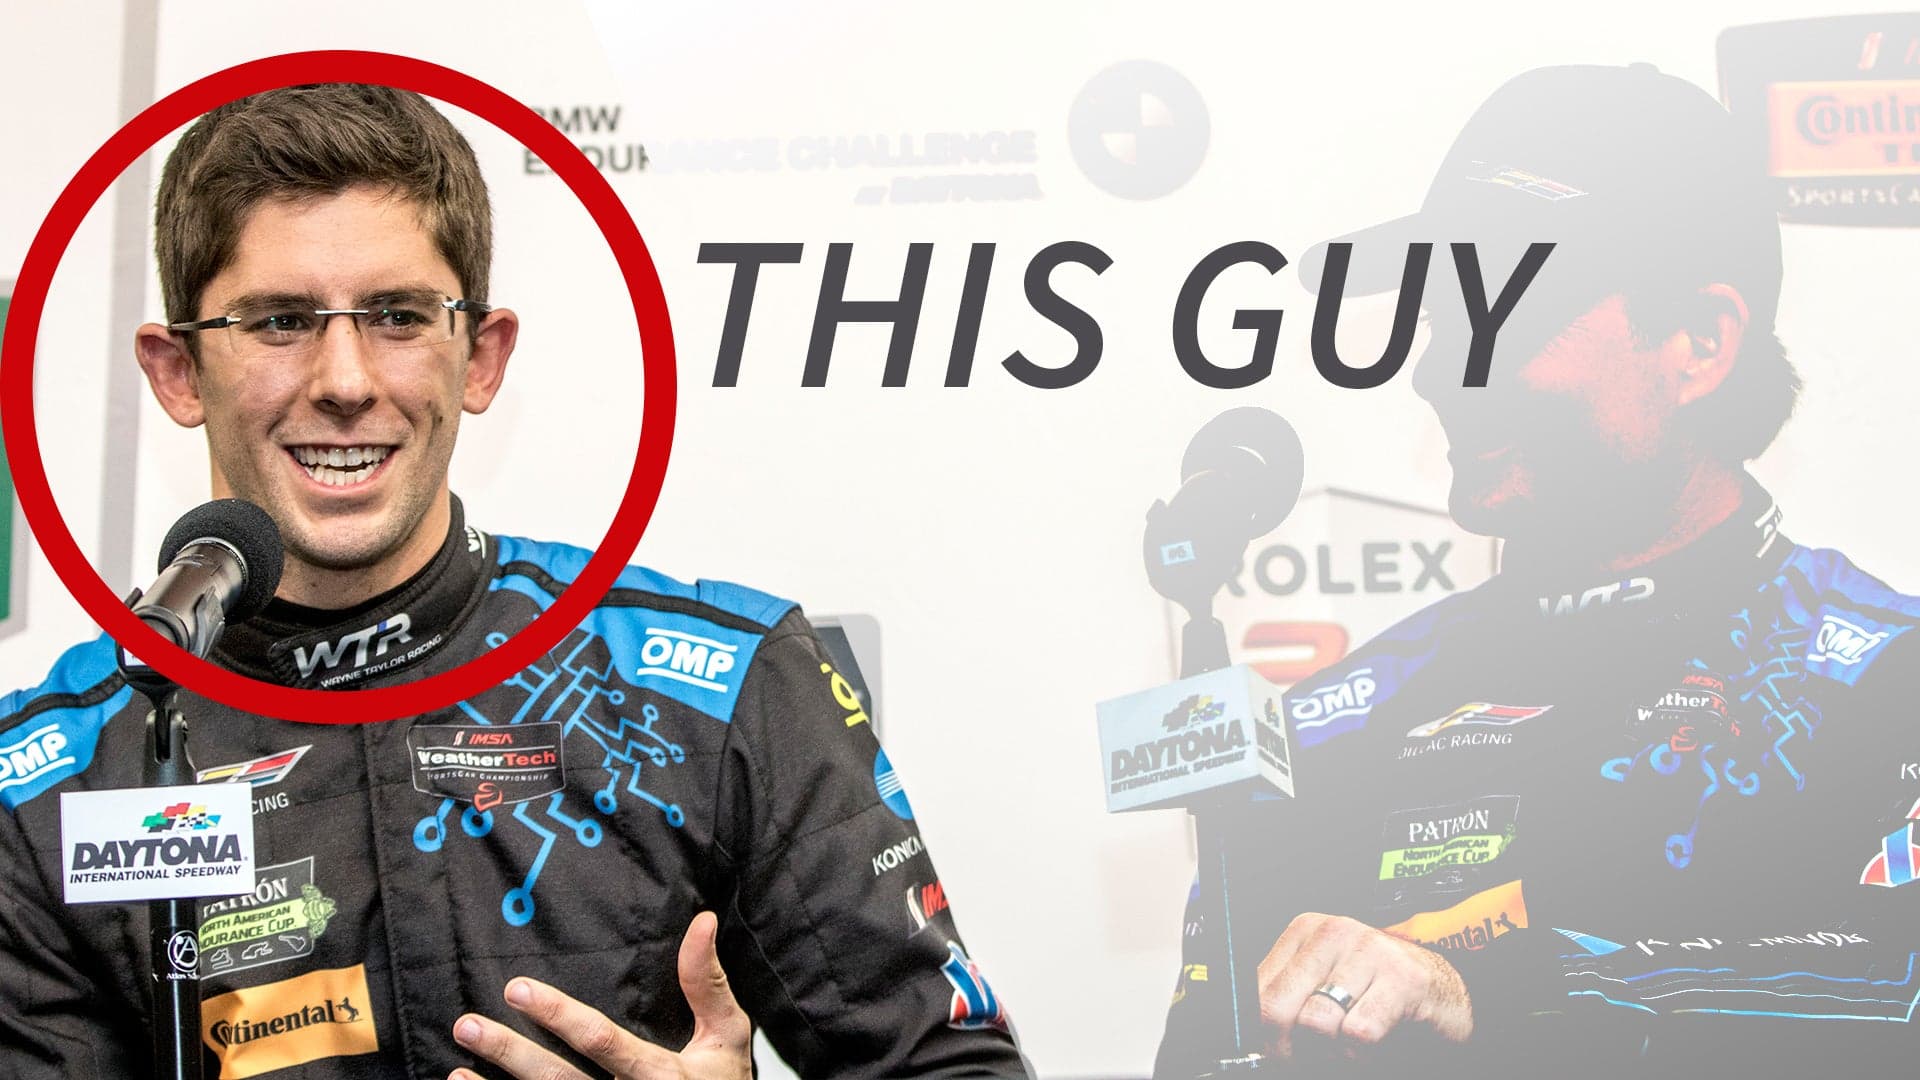 Jeff Gordon Is Great, but We’re Cheering for His Rolex 24 Teammate